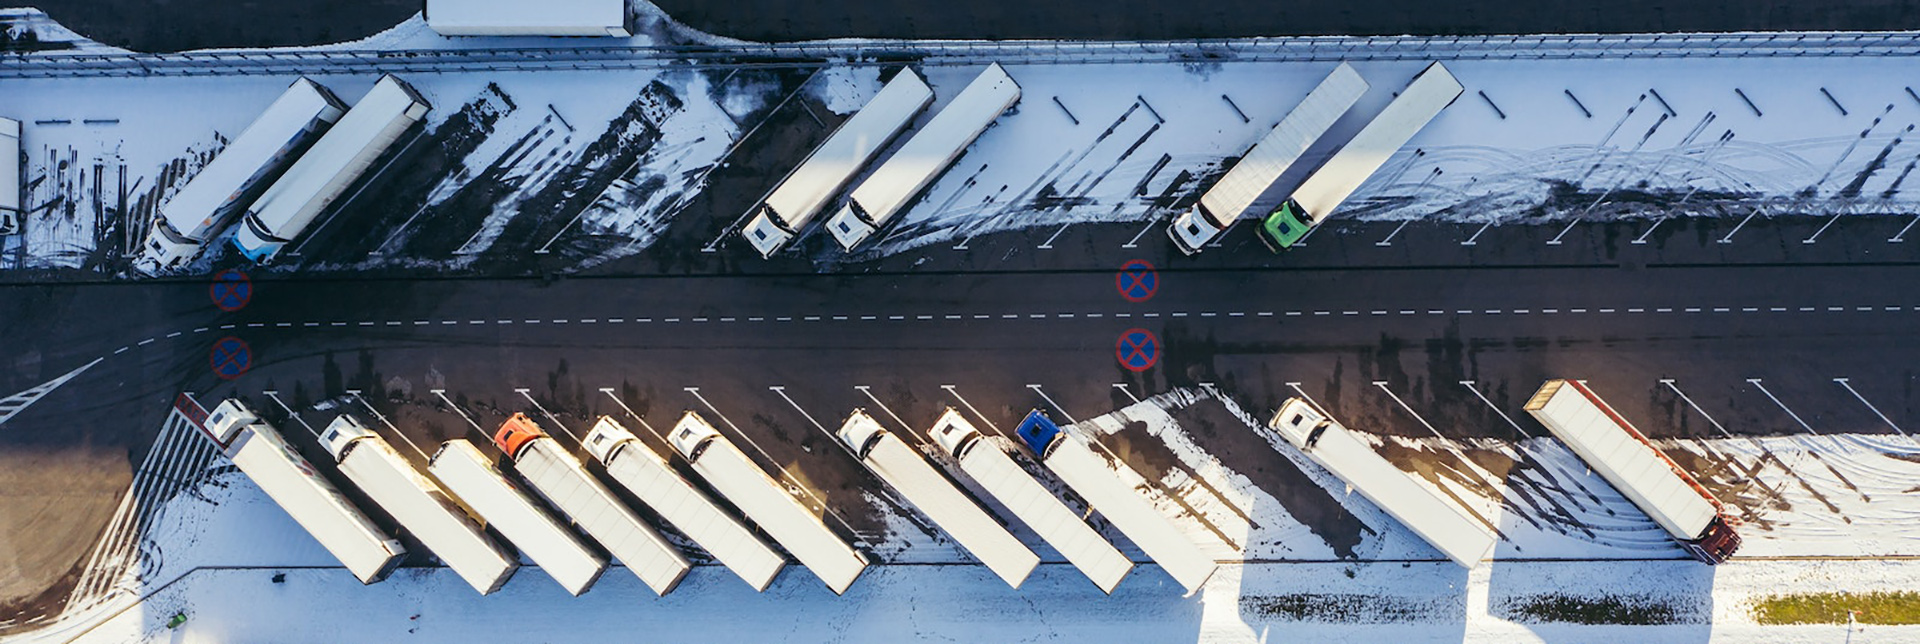 Trucks in the snow from above.